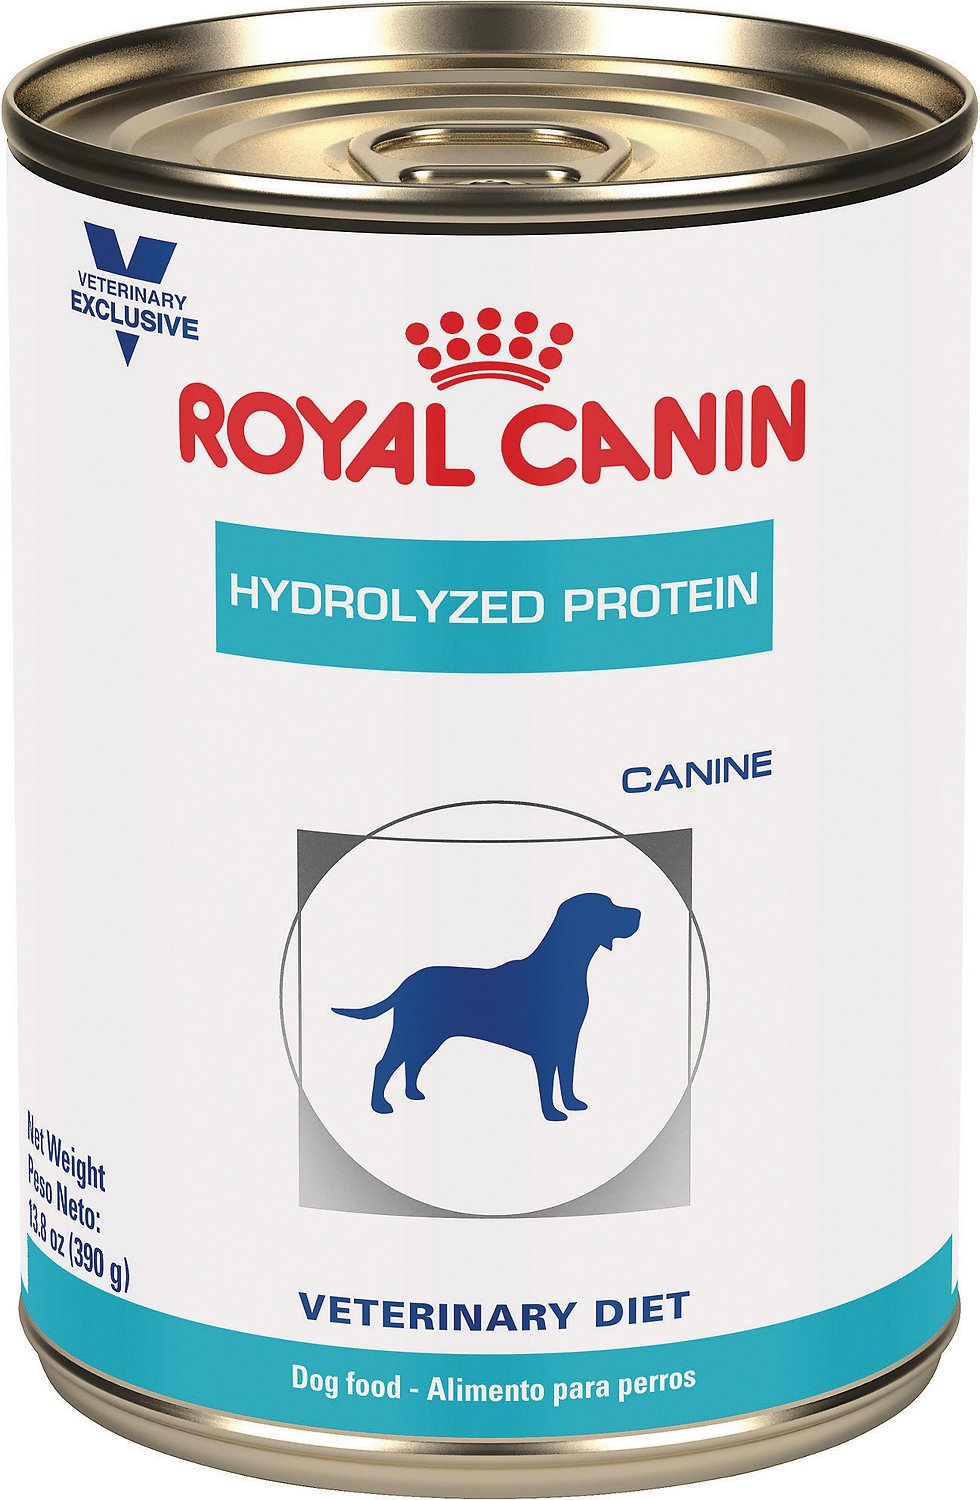 royal canin veterinary diet hydrolyzed protein adult hp dry dog food